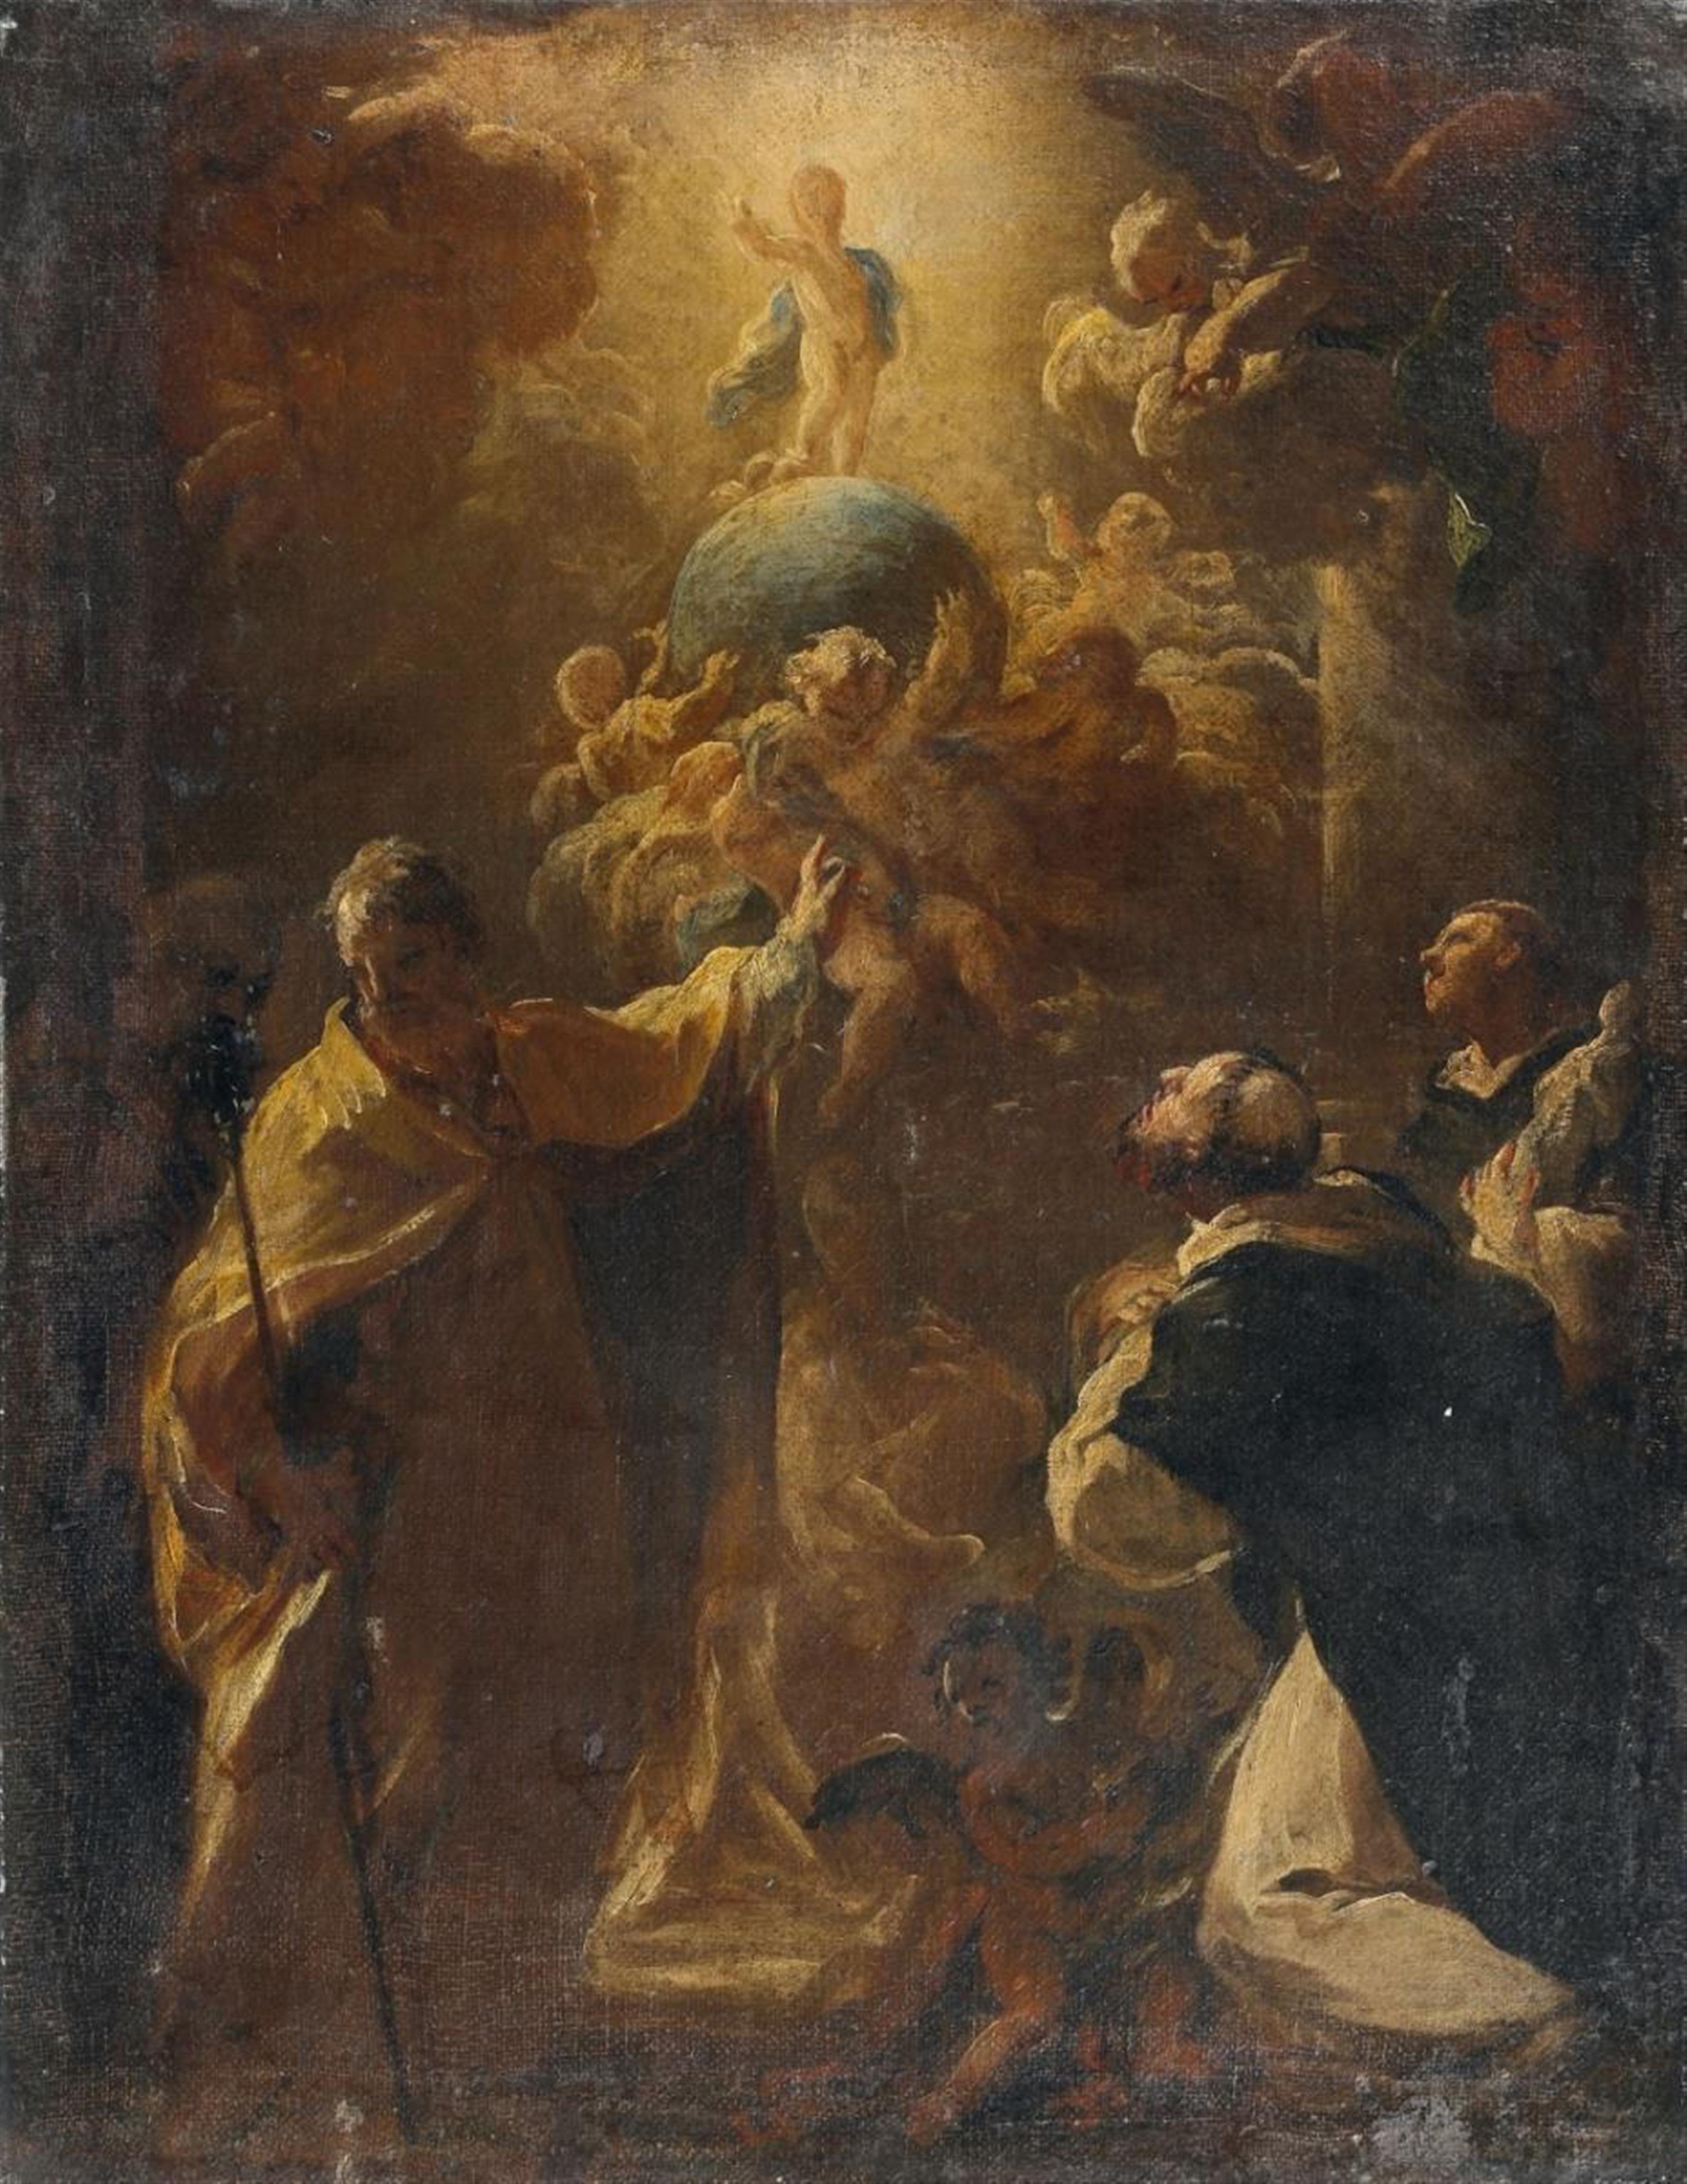 South German School, 18th century - CHRIST ON THE GLOBE WITH ST. JOSEPH AND TWO DOMINICAN FRIARS - image-1